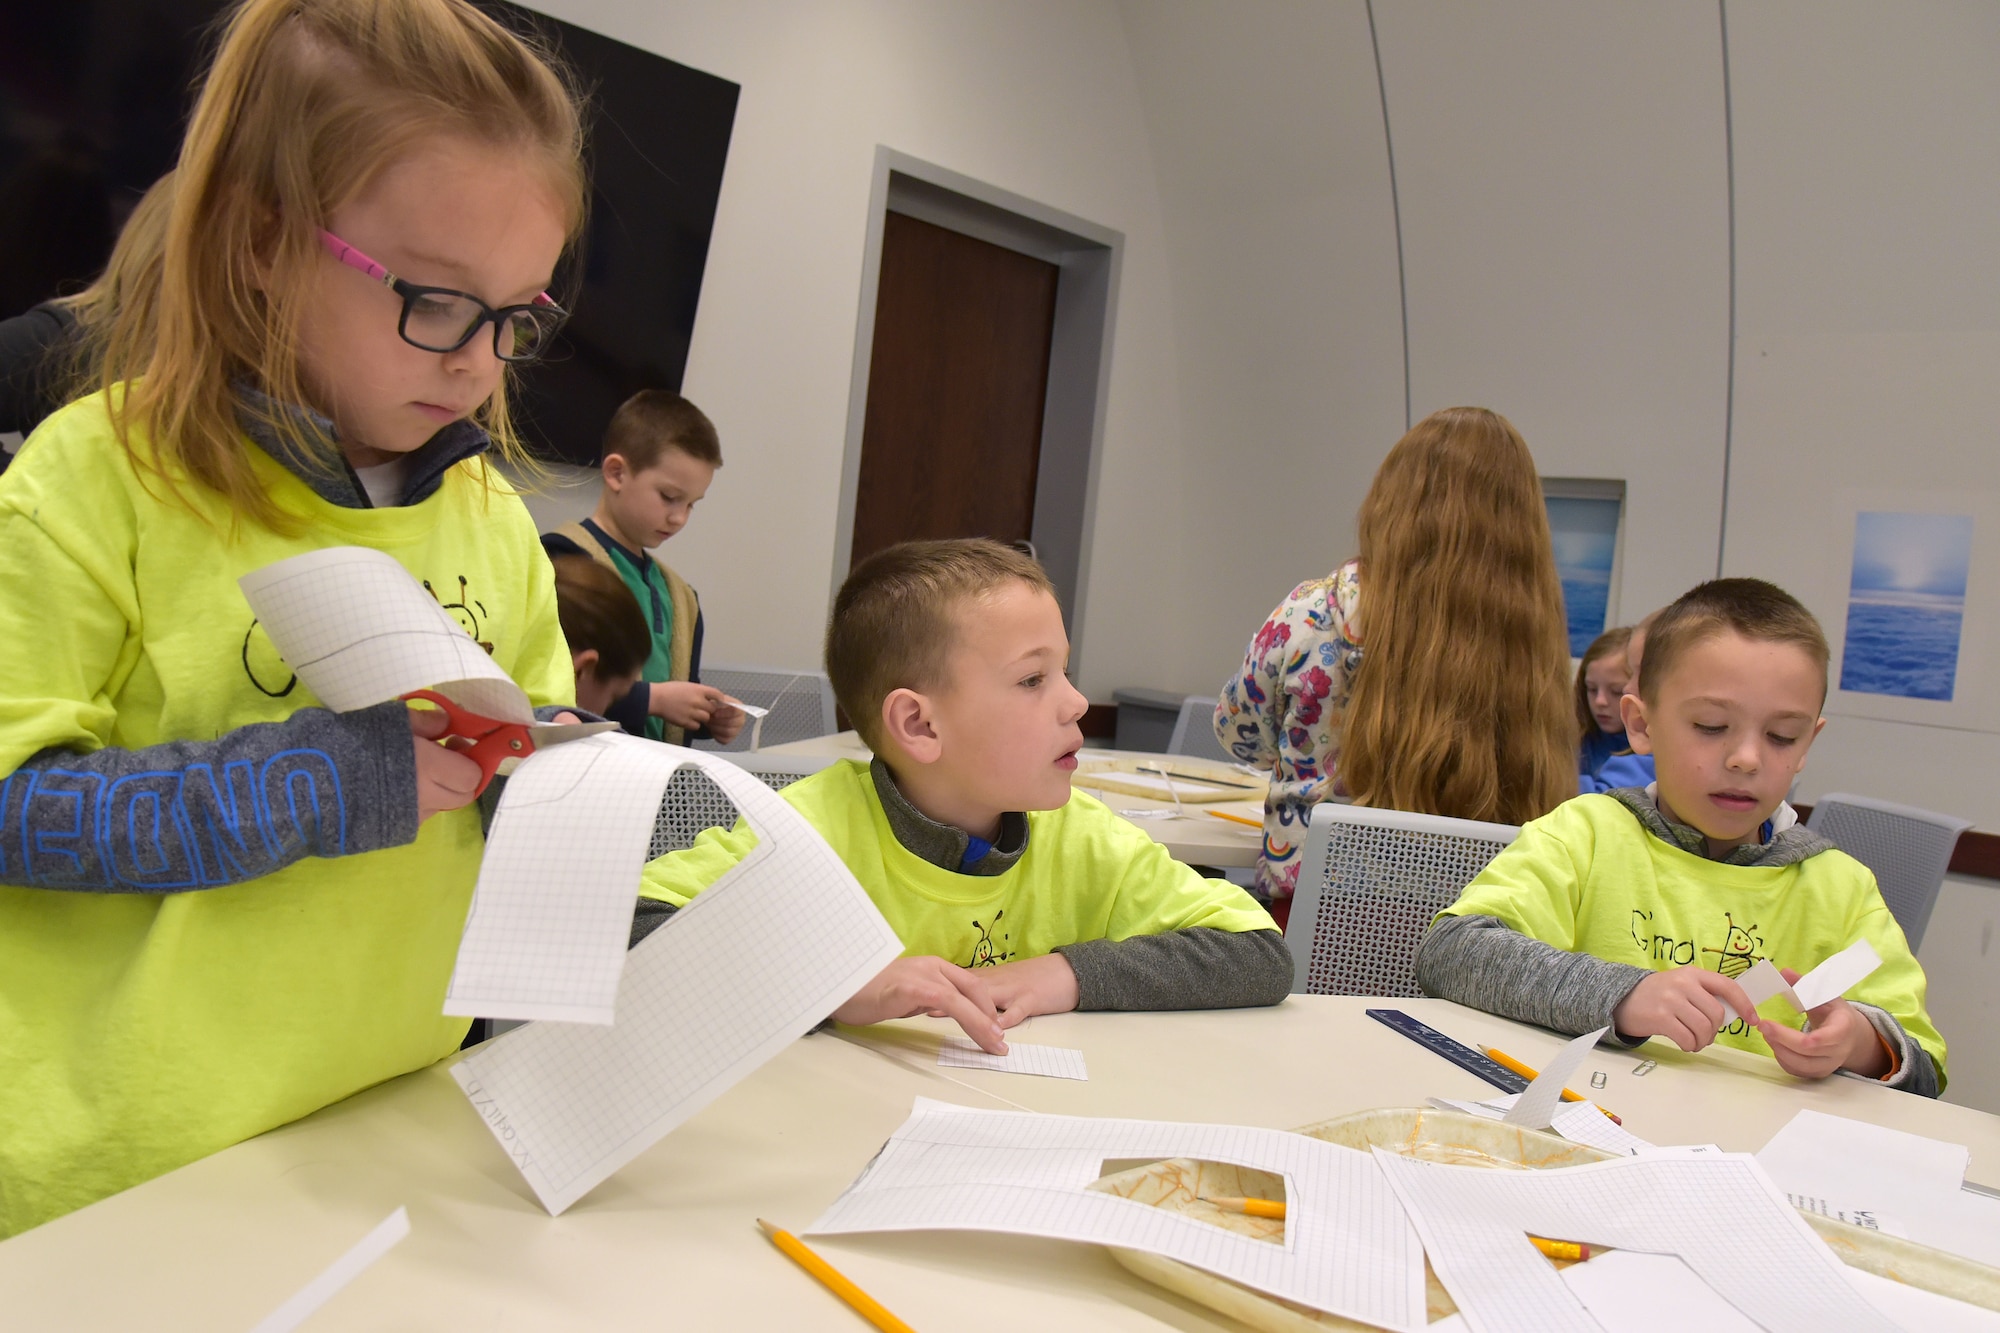 Students participating in Home School STEM Day on April 1, 2019, at the National Museum of the U.S. Air Force. Students enjoyed the guided tours, scavenger hunts, hands-on classes and aerospace demonstration stations. (U.S. Air Force photo)